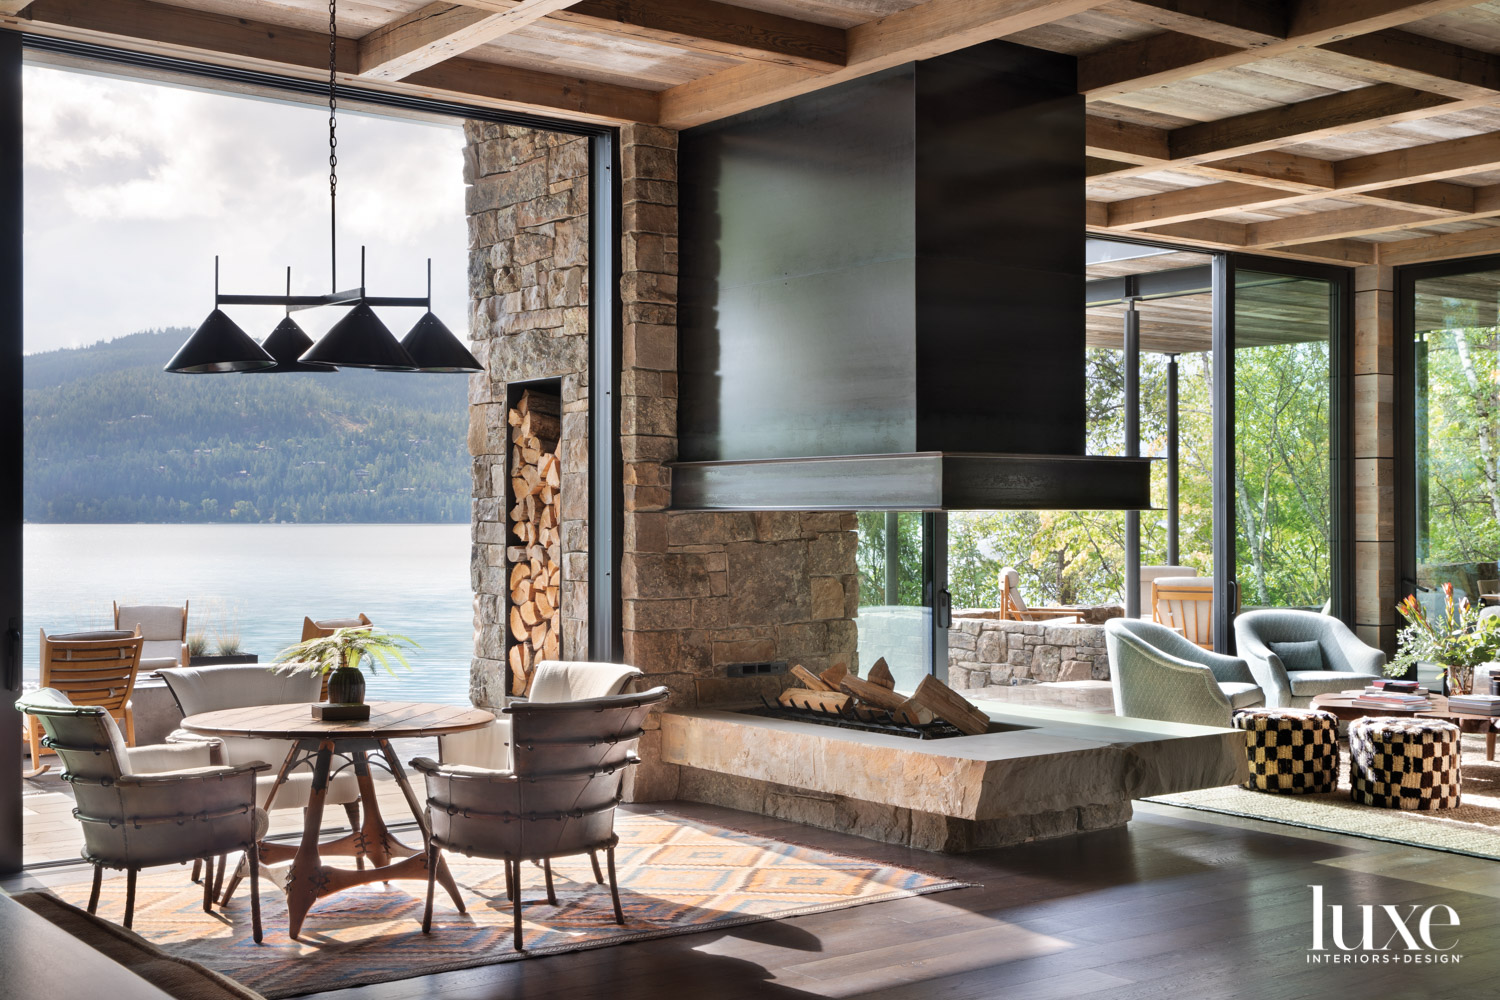 Living area featuring a central open fireplace with a games table and chairs on one side and lounge chairs on the other with views facing the lake